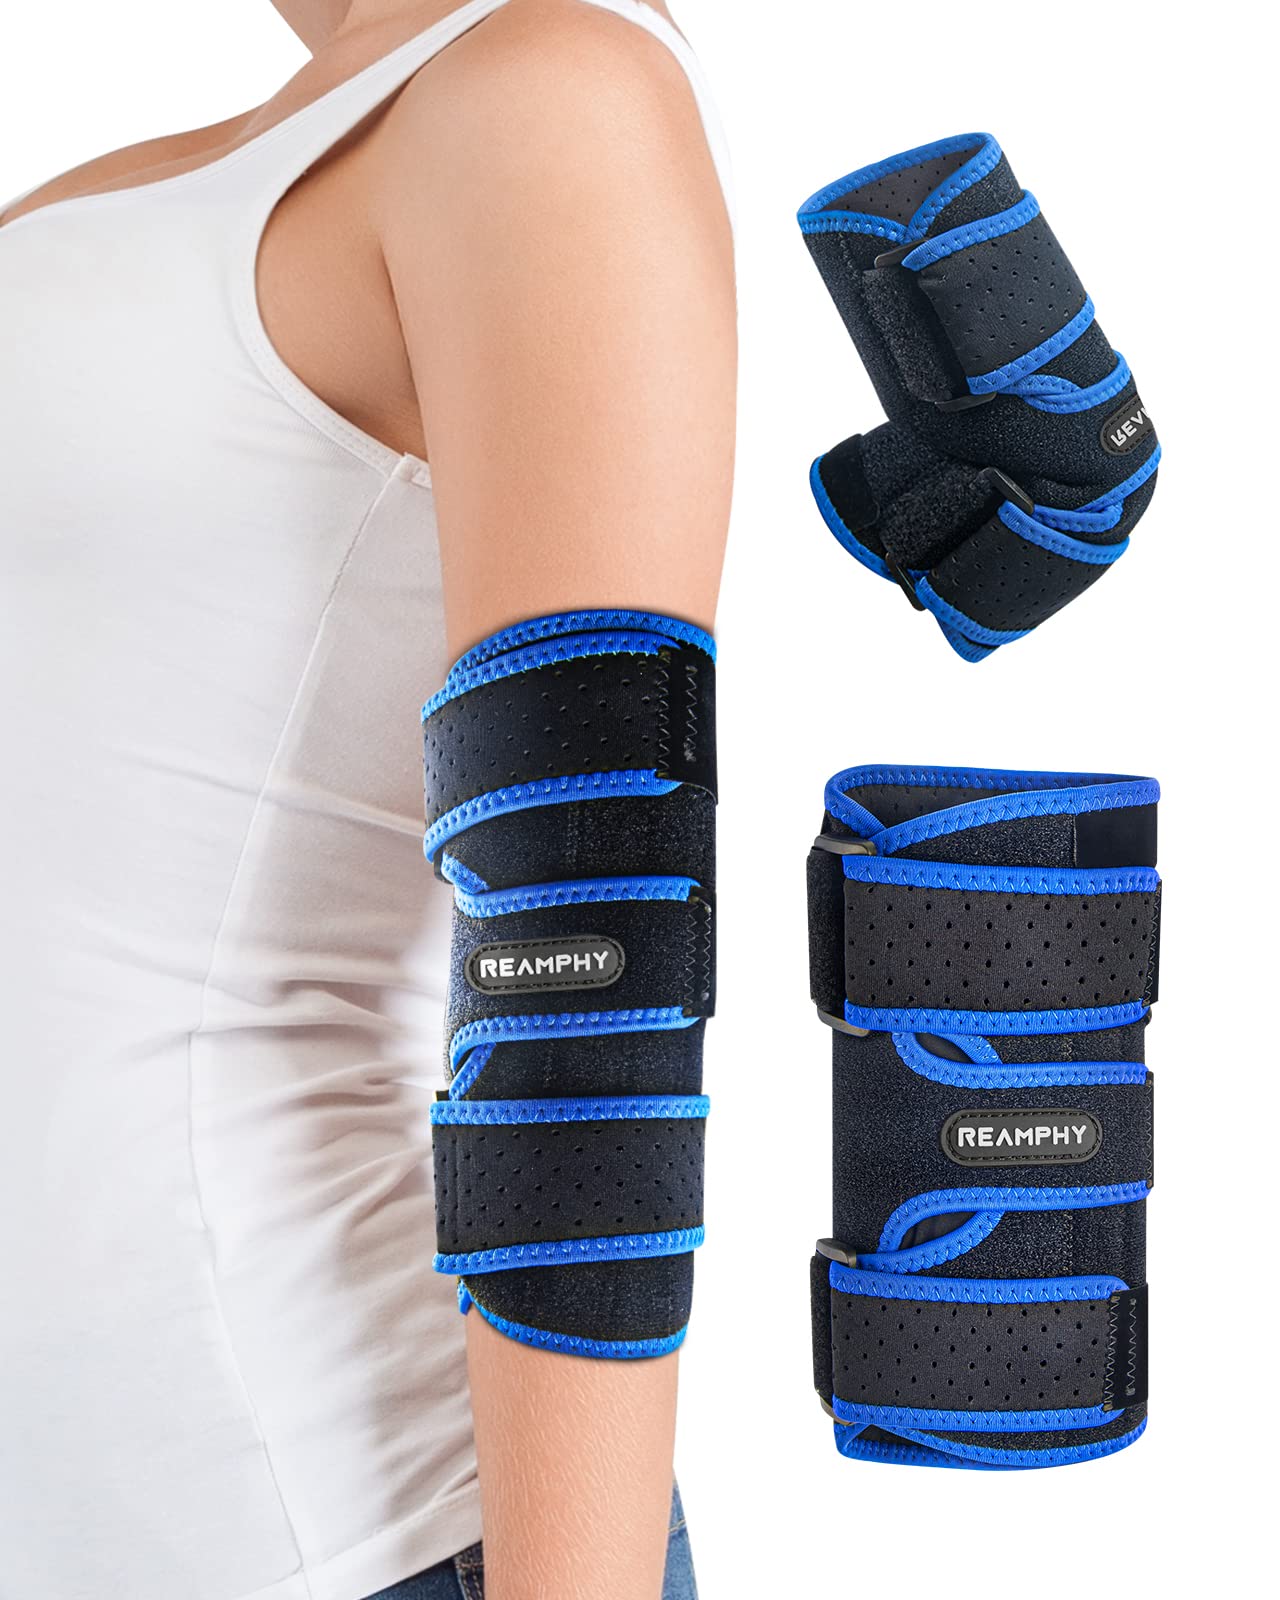 Best Brace for Cubital Tunnel Syndrome